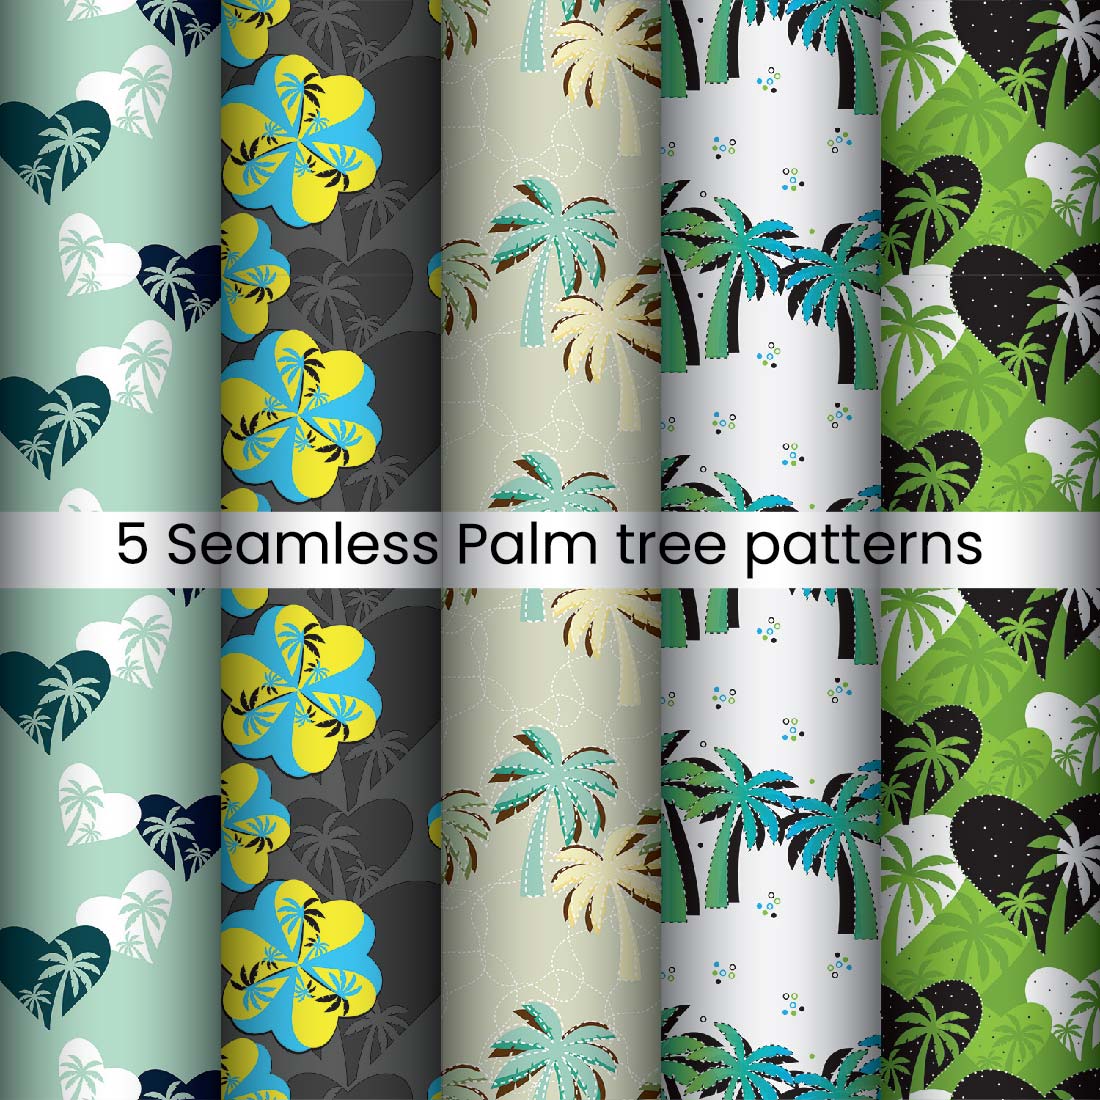 5 Seamless Palm Tree Pattern Designs main cover.